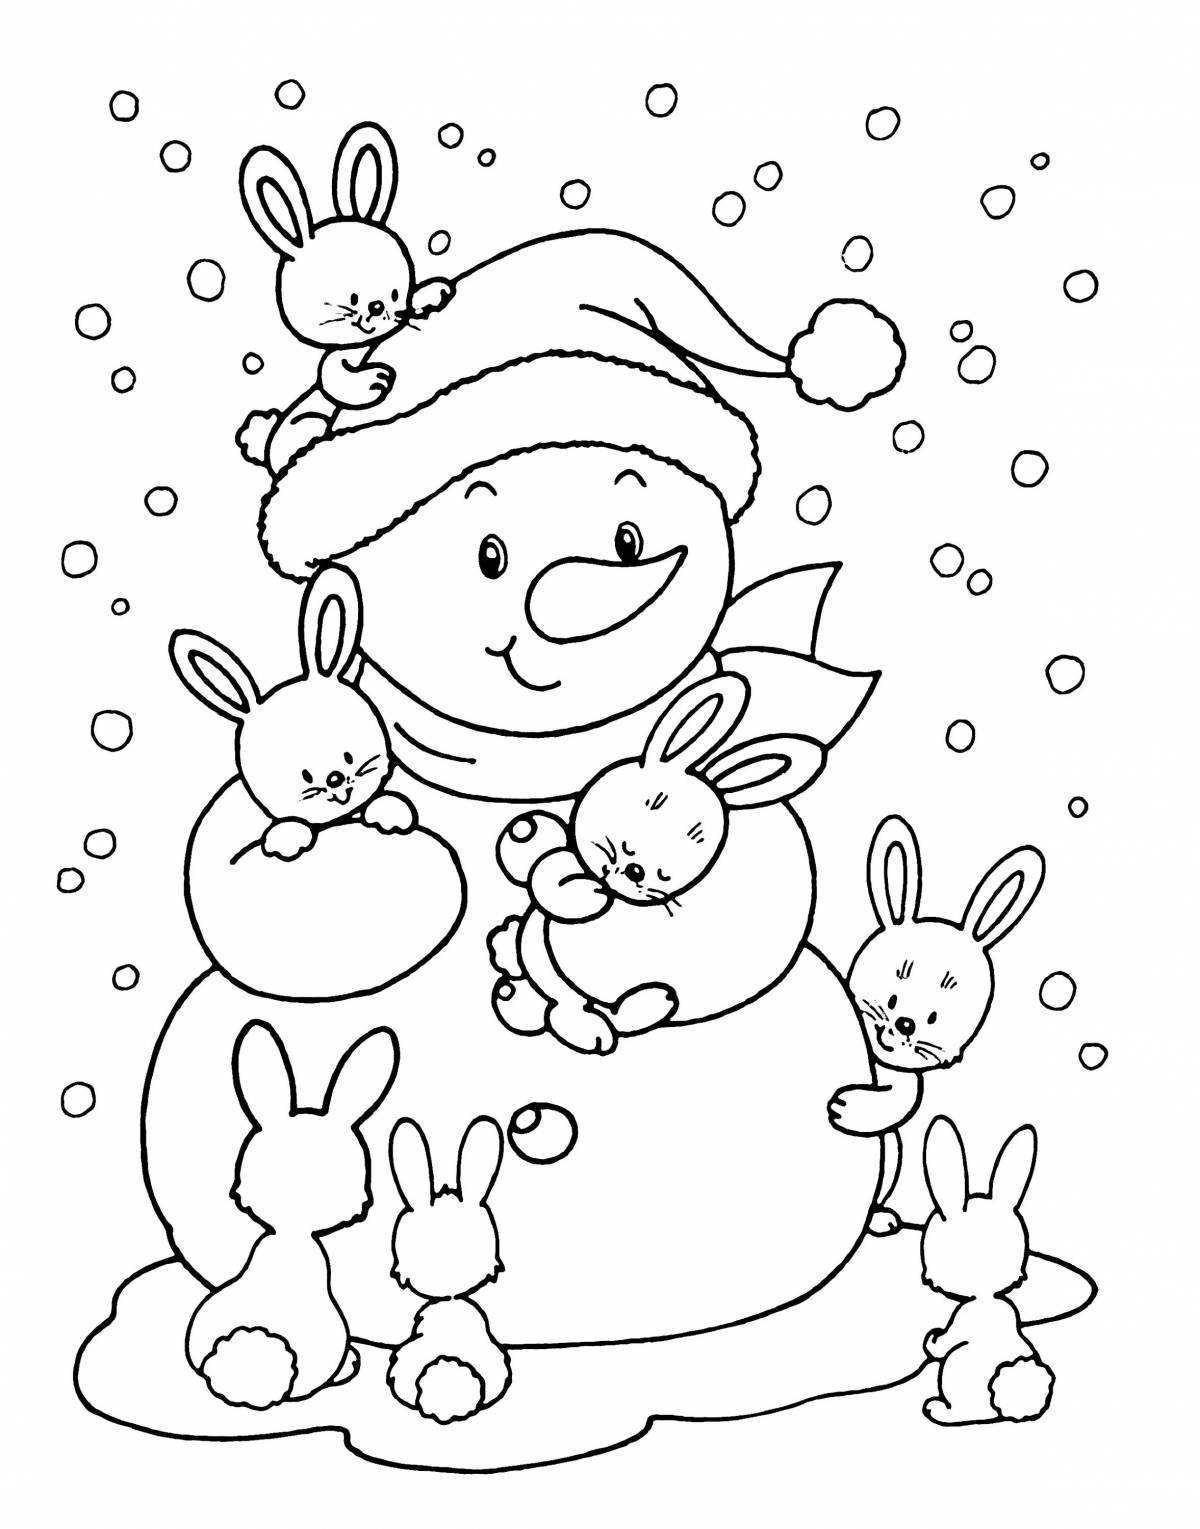 Sparkling Bunny and Snowman Coloring Page